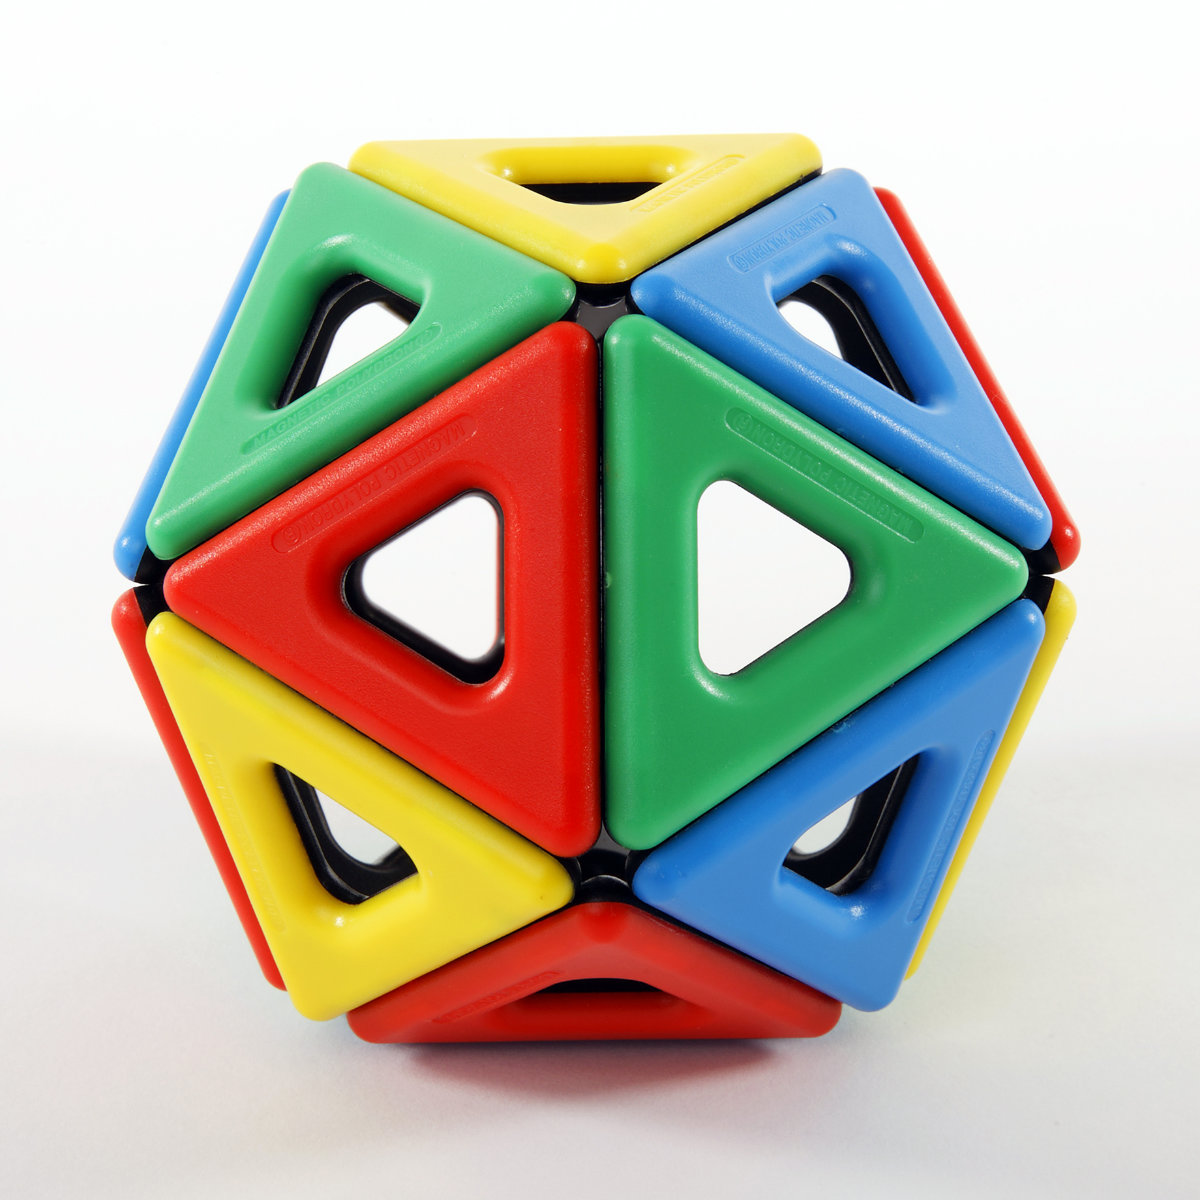 Magnetic Polydron School Set, Introduce the world of geometry to your classroom with the Magnetic Polydron School Set. This extensive set provides an economical solution to equip multiple classrooms with the versatile and engaging Magnetic Polydron construction pieces.Containing a total of 224 pieces, including a range of shapes, this set allows students to explore and build to their heart's content. With 36 squares, 60 equilateral triangles, 24 right angle triangles, 60 isosceles triangles, 12 rectangles, 